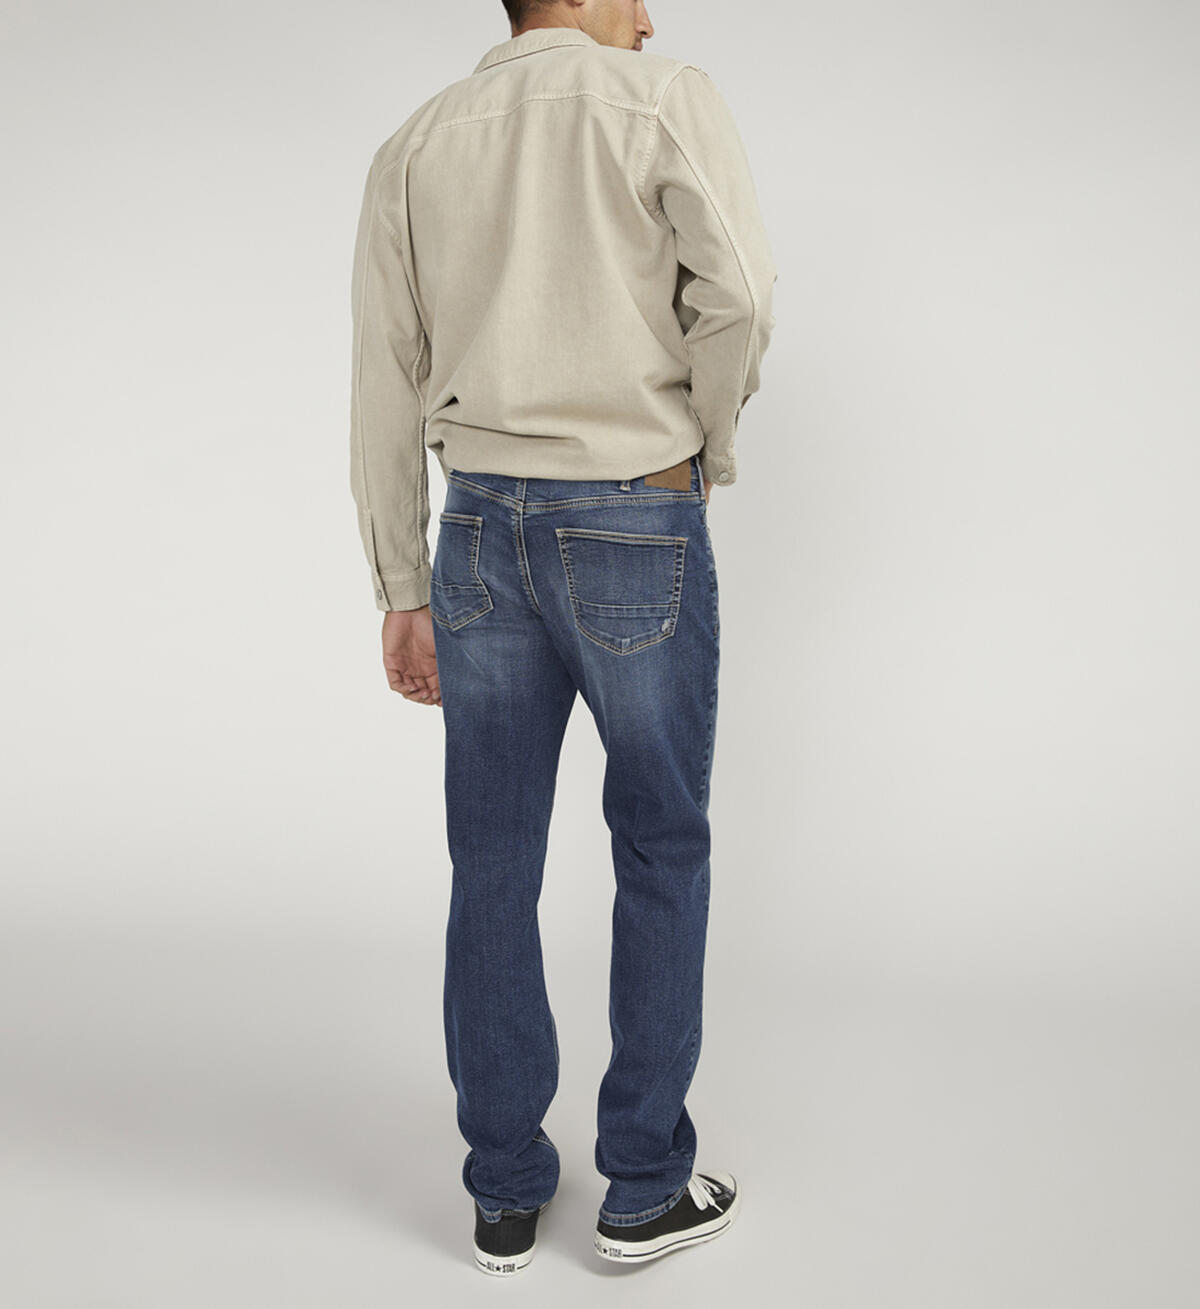 Machray is a modern take on the athletic fit jean. This style features a longer saddle and a slim-yet-spacious fit through the hip and thigh—proving some much-needed room for muscles